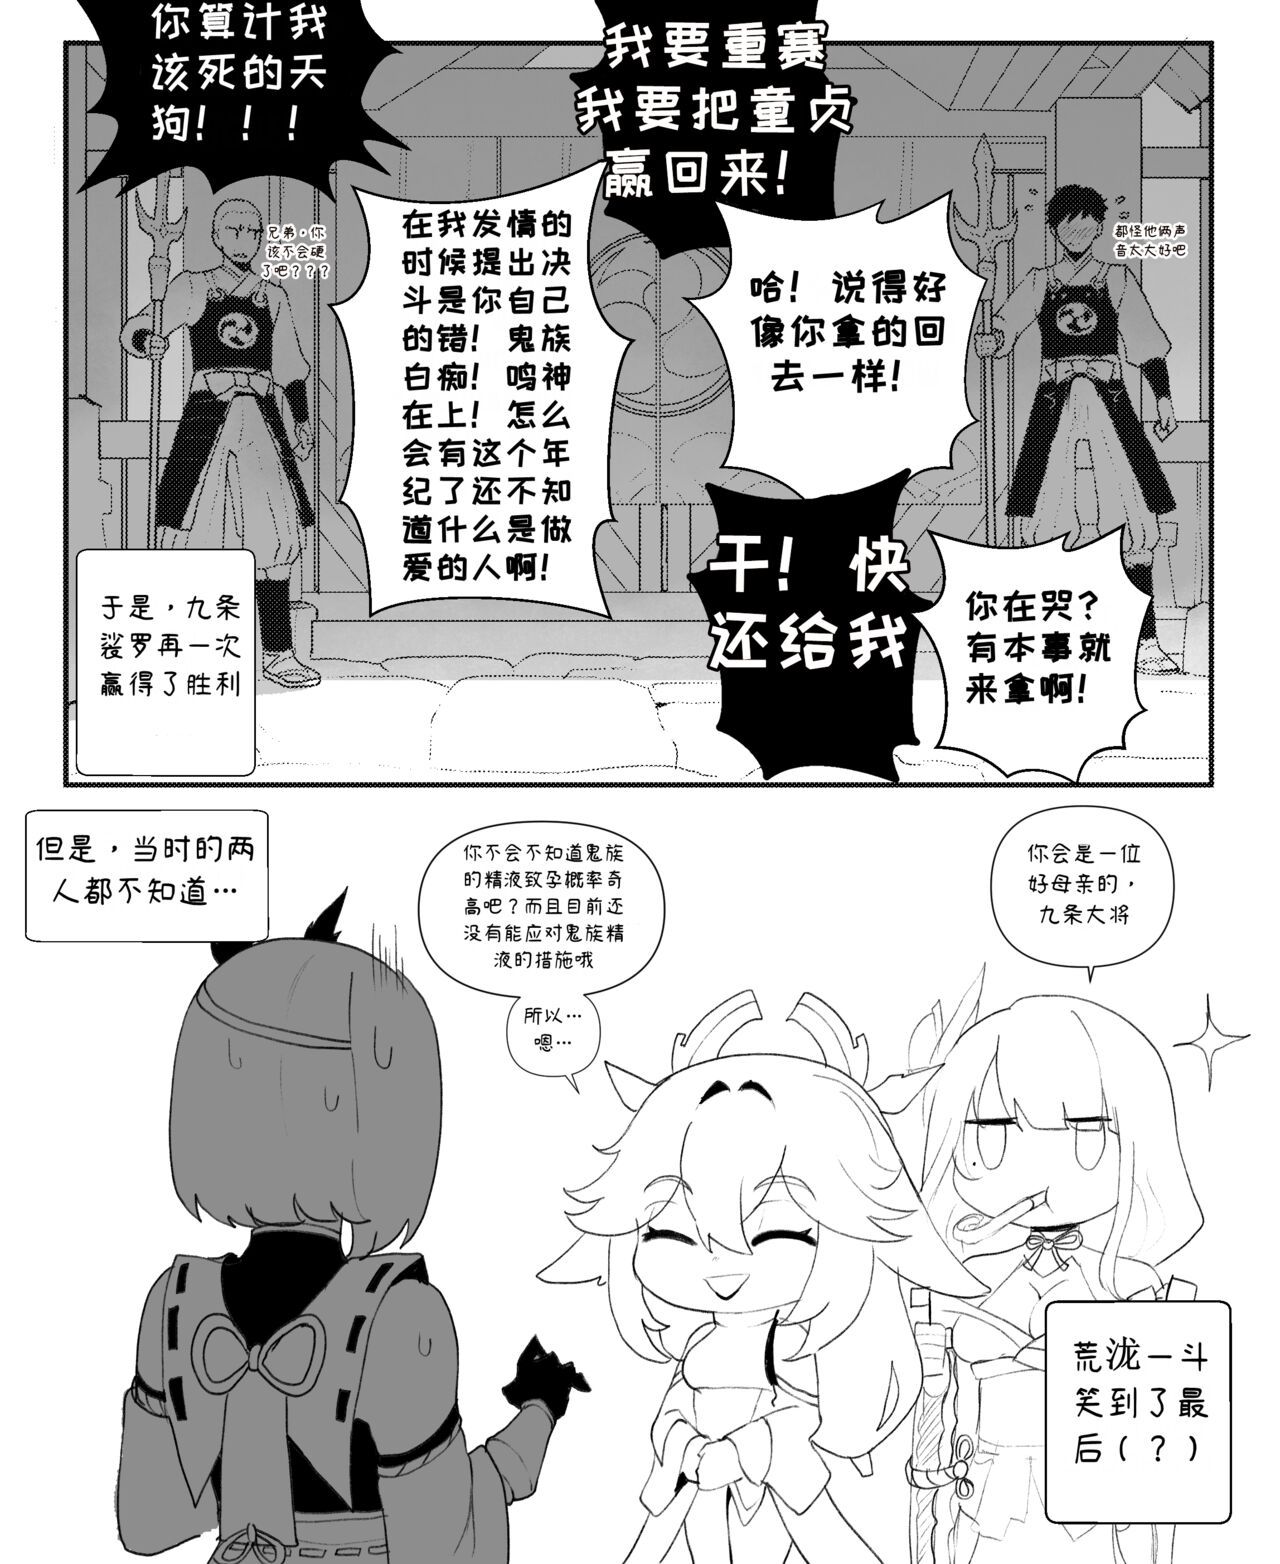 ThiccWithaQ [Chinese] [Ongoing] ThiccWithaQ 【Neko汉化】 85